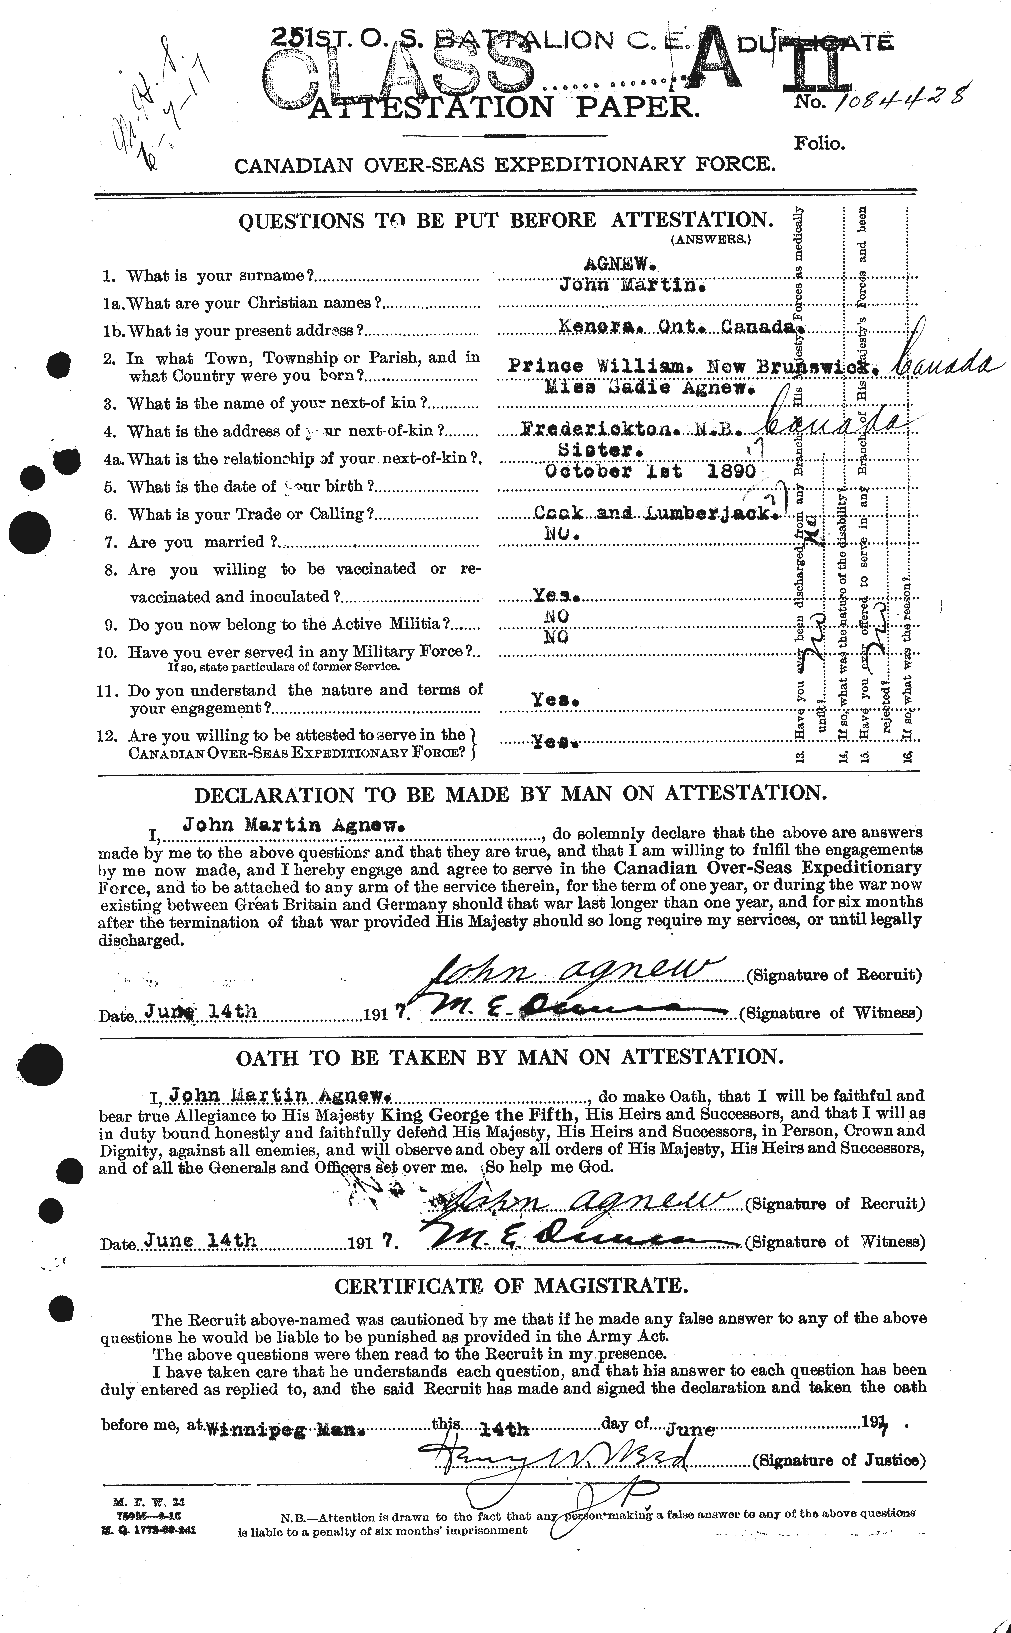 Personnel Records of the First World War - CEF 203784a